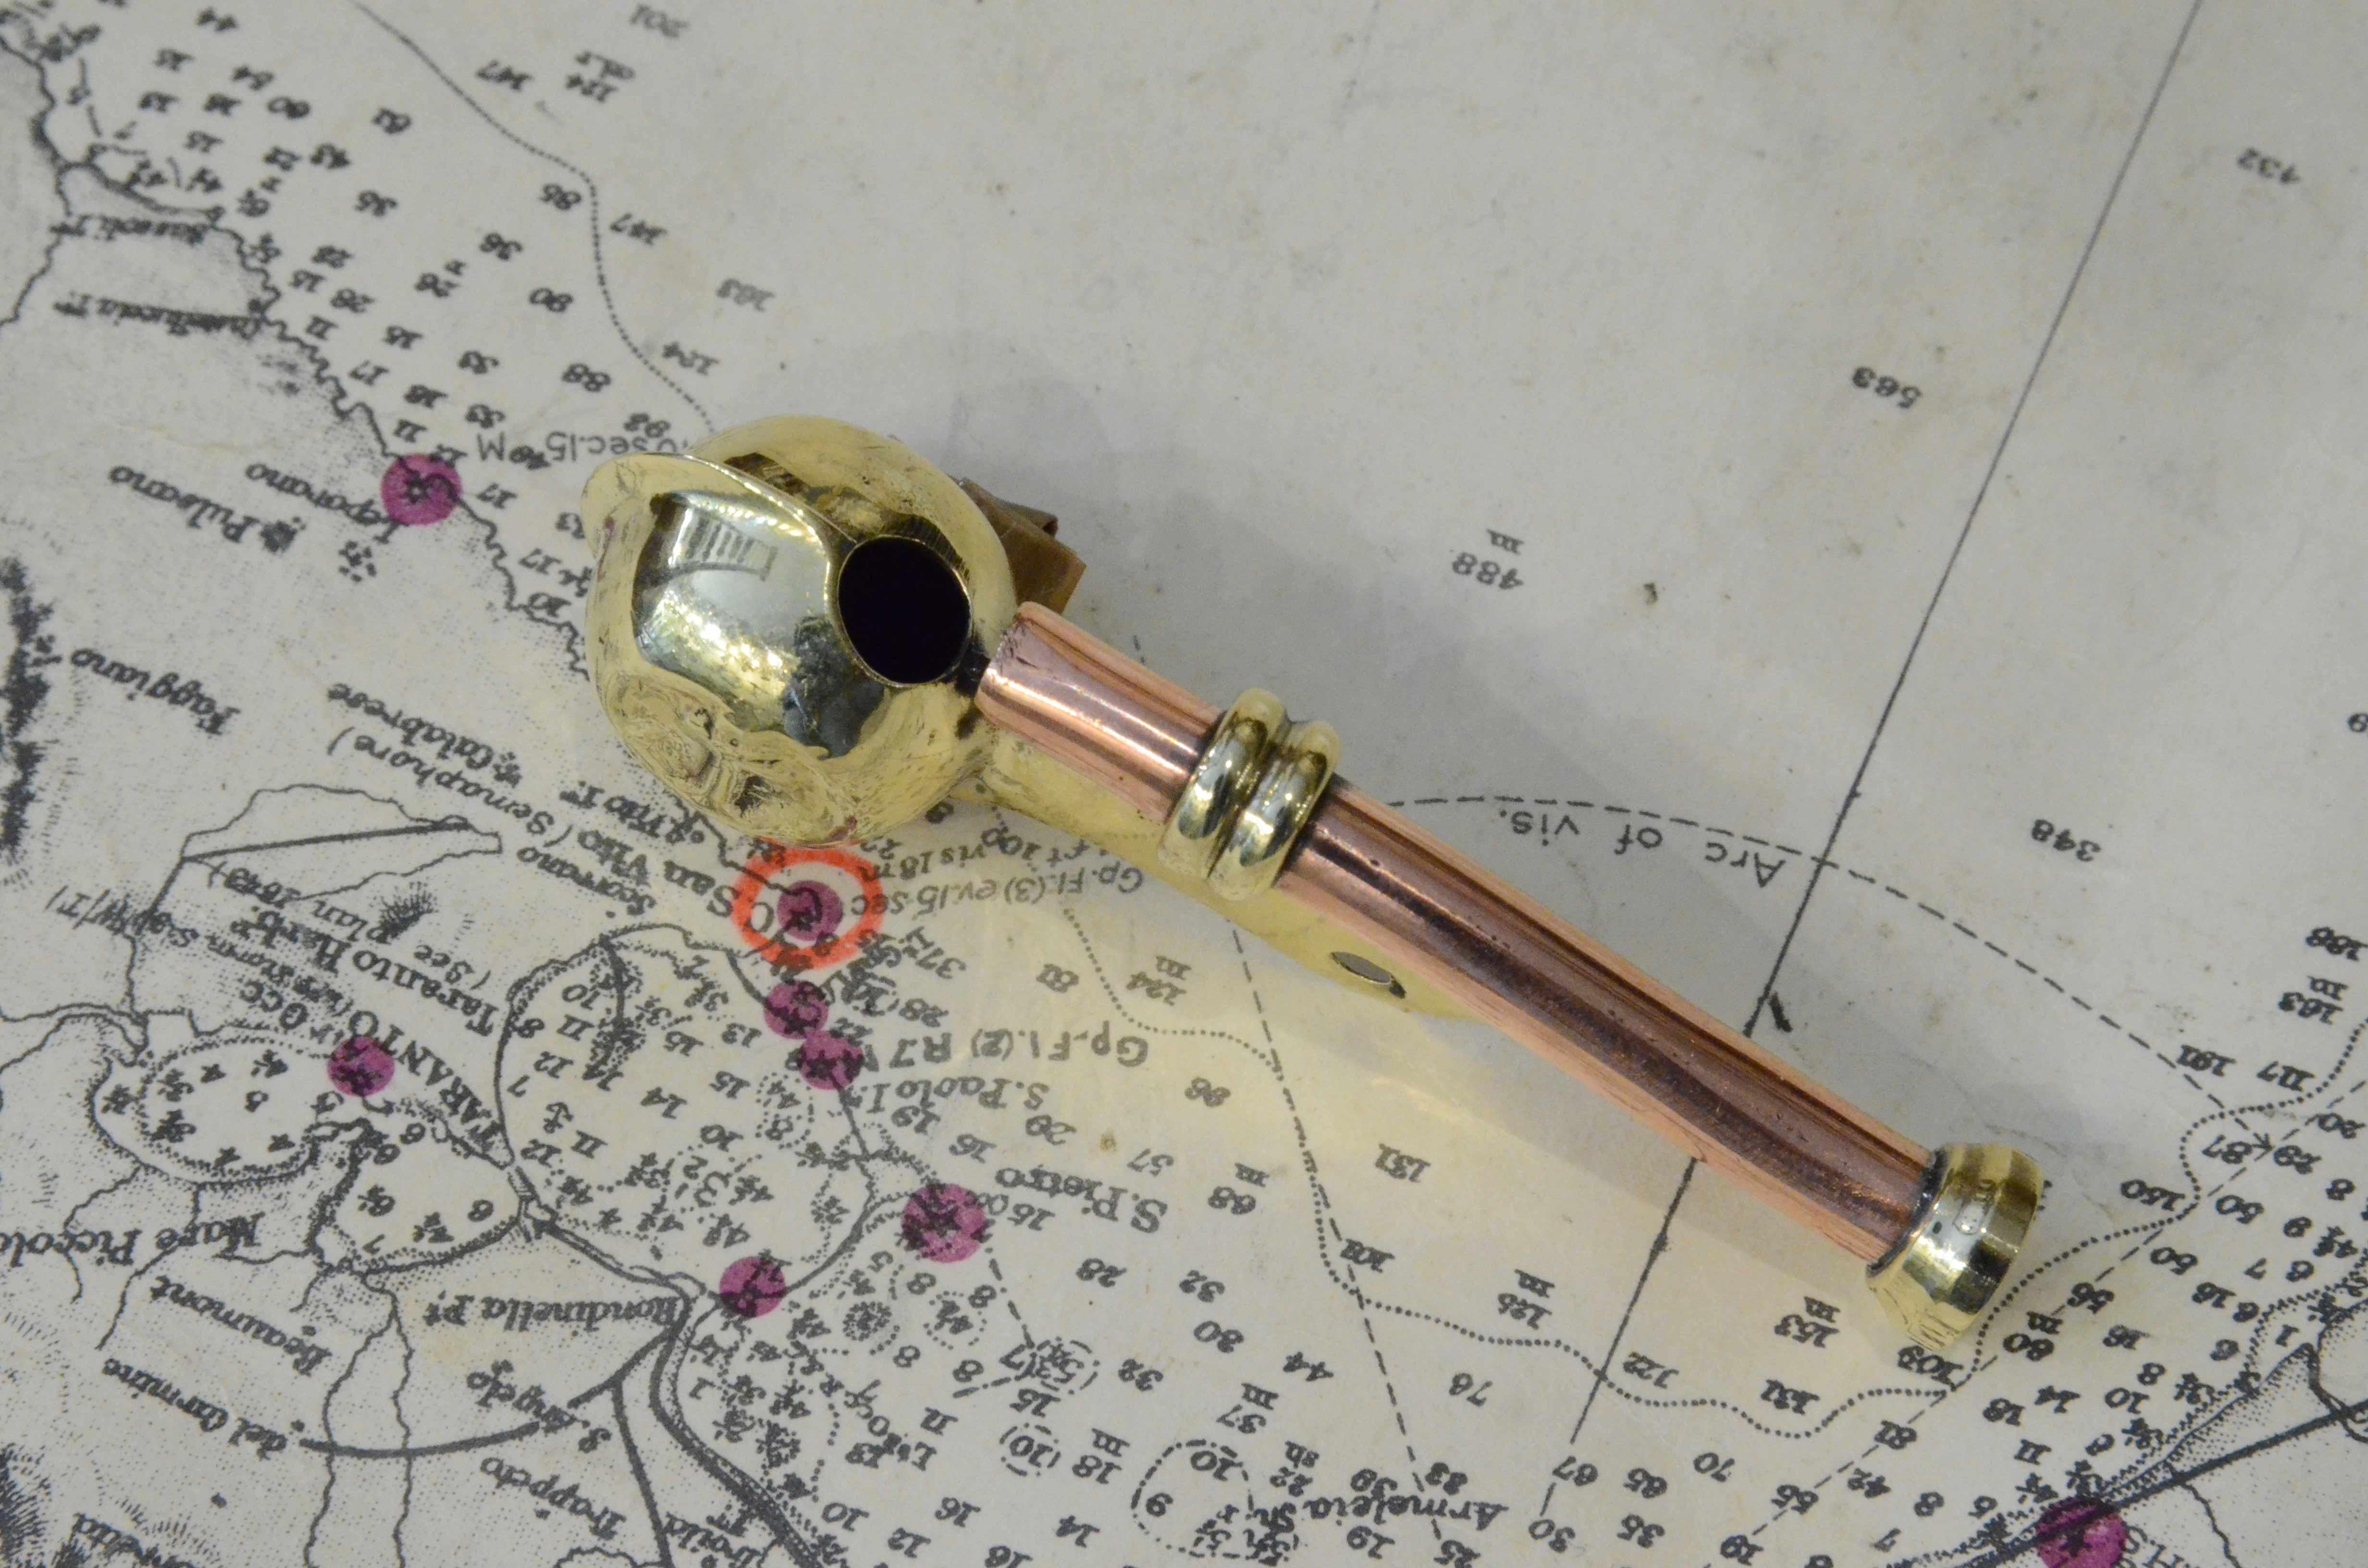 Boatswain whistle of brass and copper, English manufacture from the early 1930s. 
Measures: Length 7 cm – 2.8 inches, width 1,6 cm - 0.6 inches, height 2.2 cm - 0.75 inches. 
Good condition.
Shipping is insured by Lloyd's London; our gift box is